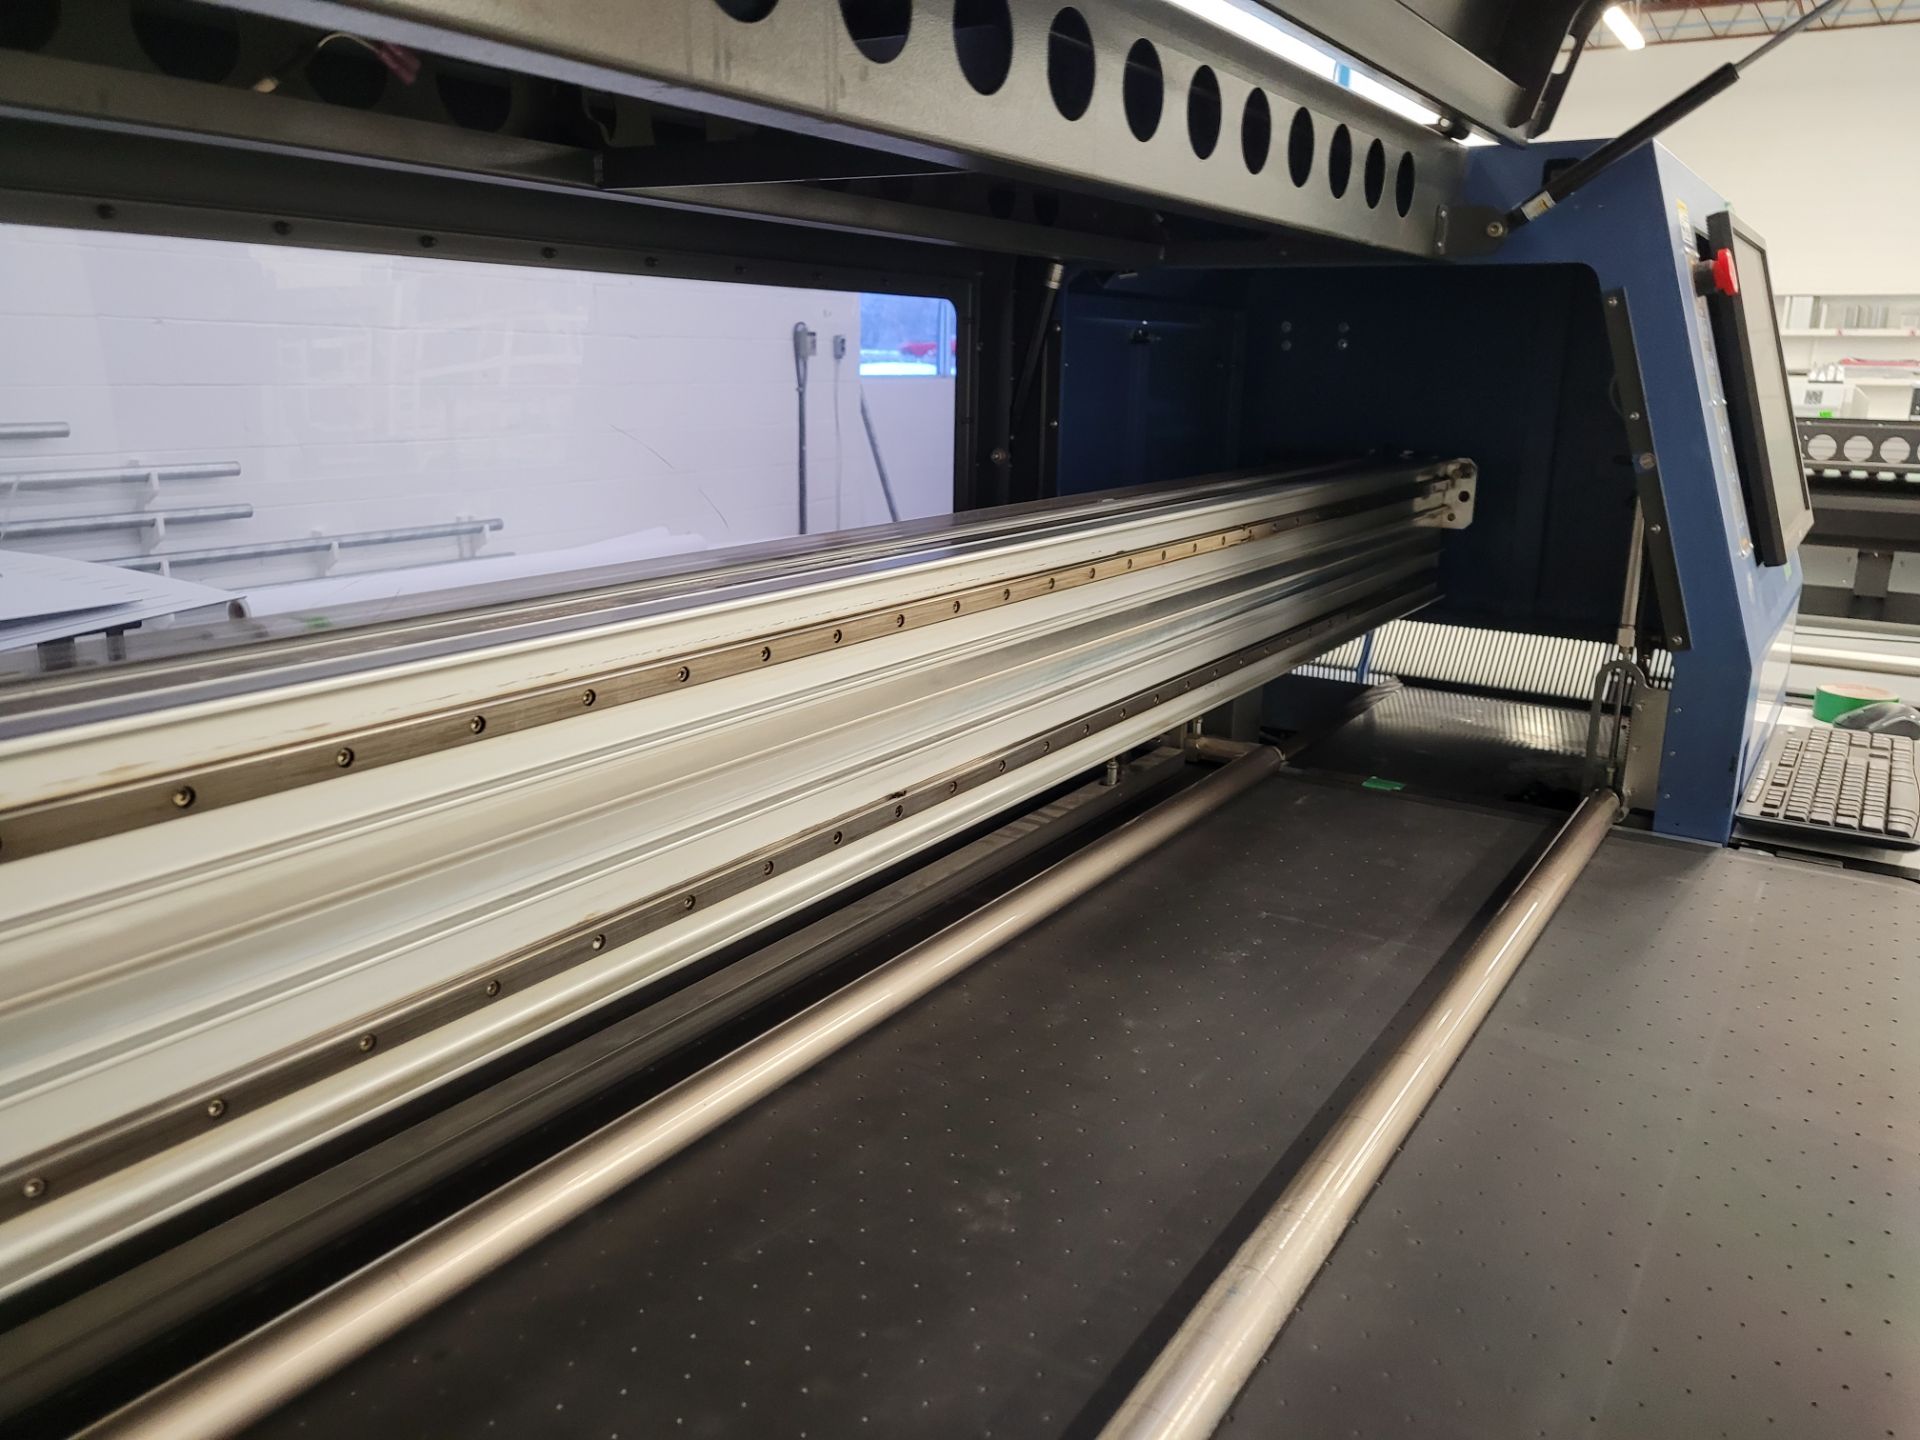 DYSS UV Printing Machine mod. Lasco & Apollo, ser. 221674RR000100264, 220V, includes conveyors and - Image 12 of 37